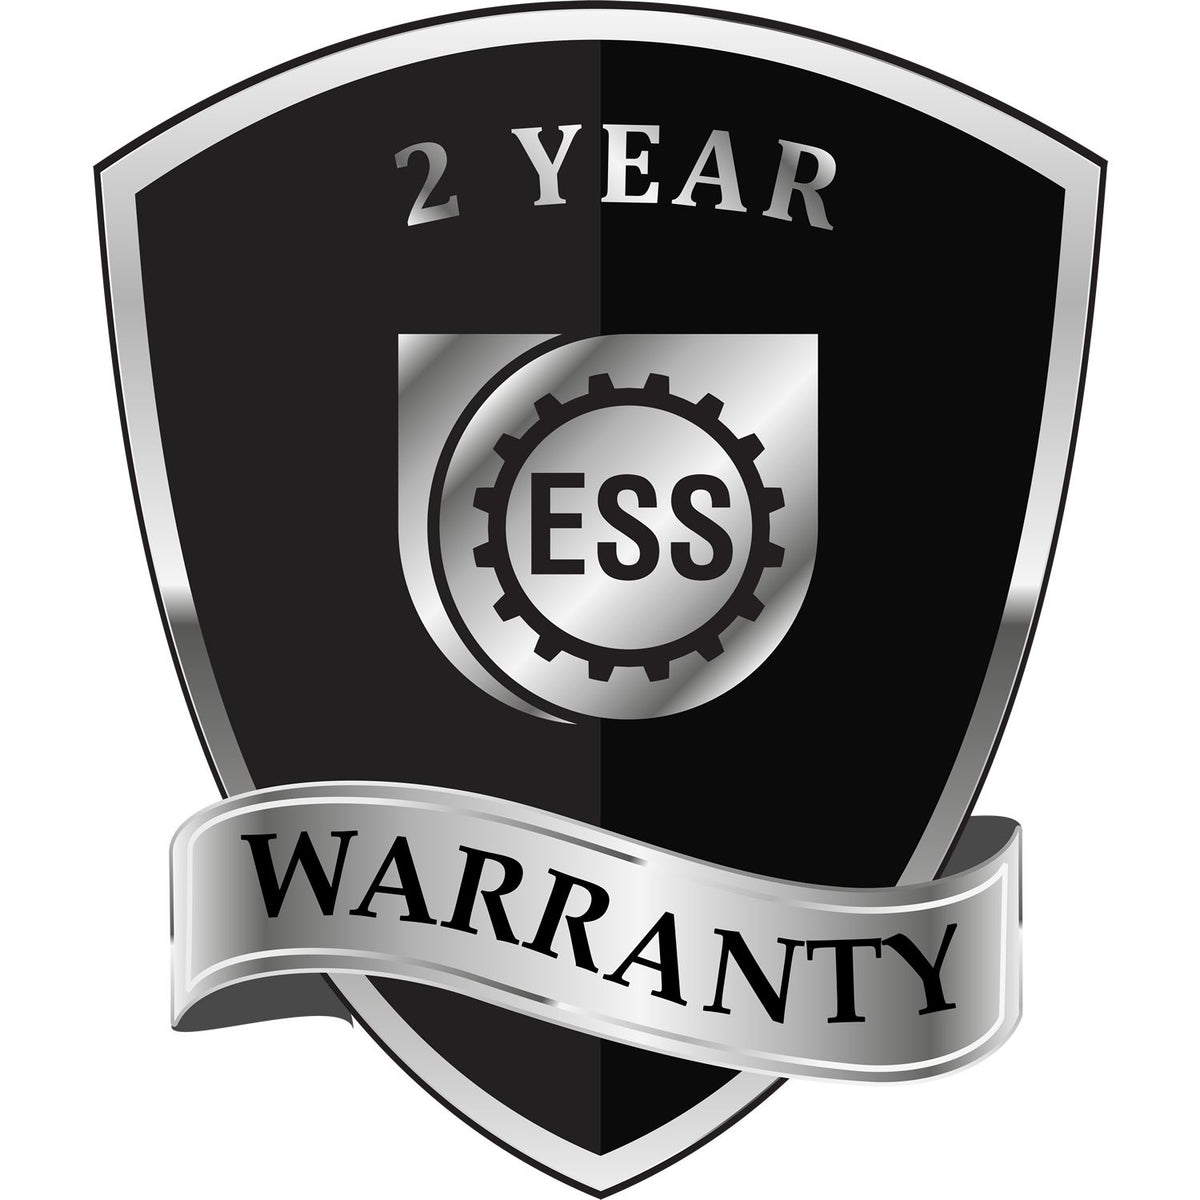 A black and silver badge or emblem showing warranty information for the Gift Nevada Landscape Architect Seal